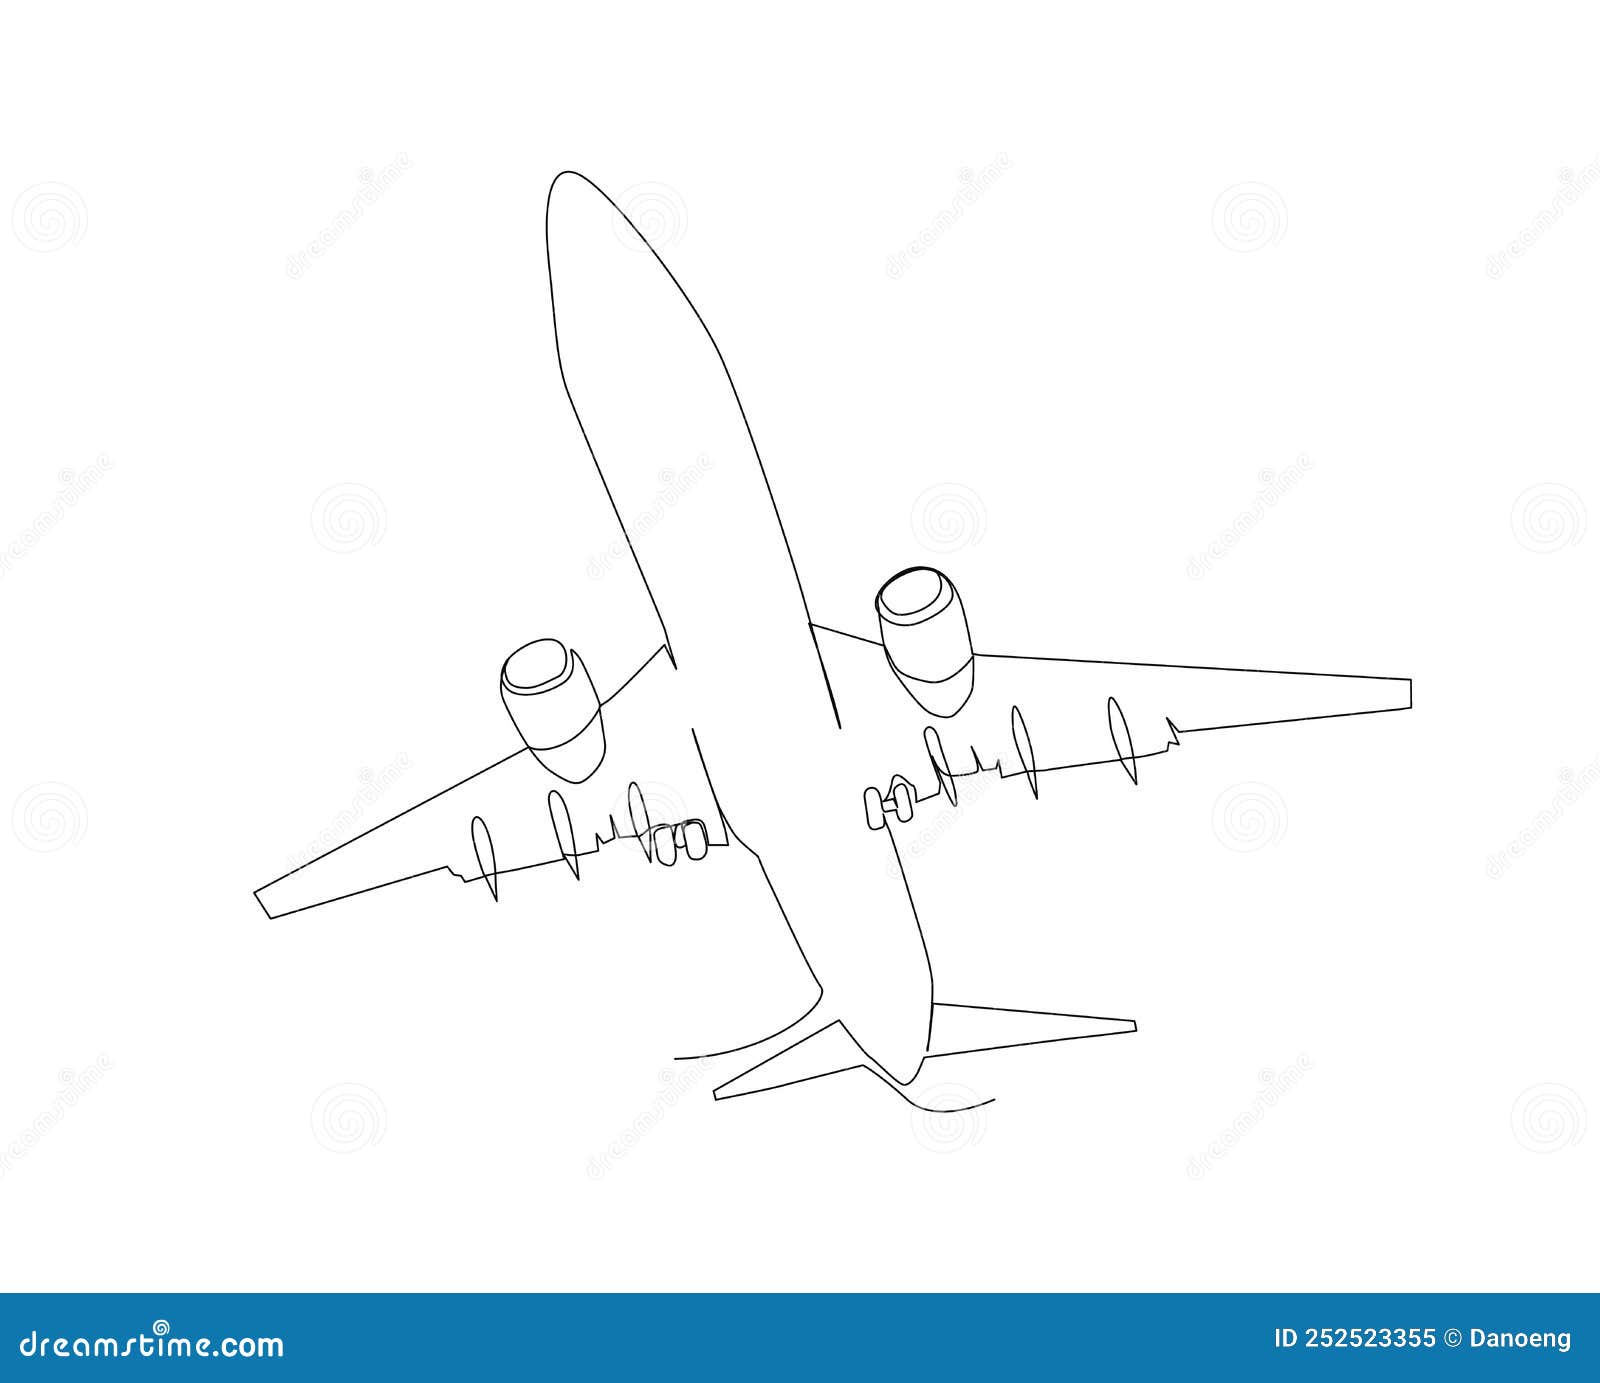 Aeroplane drawing video How to draw aeroplane simple Drawing airplane  sketch  YouTube